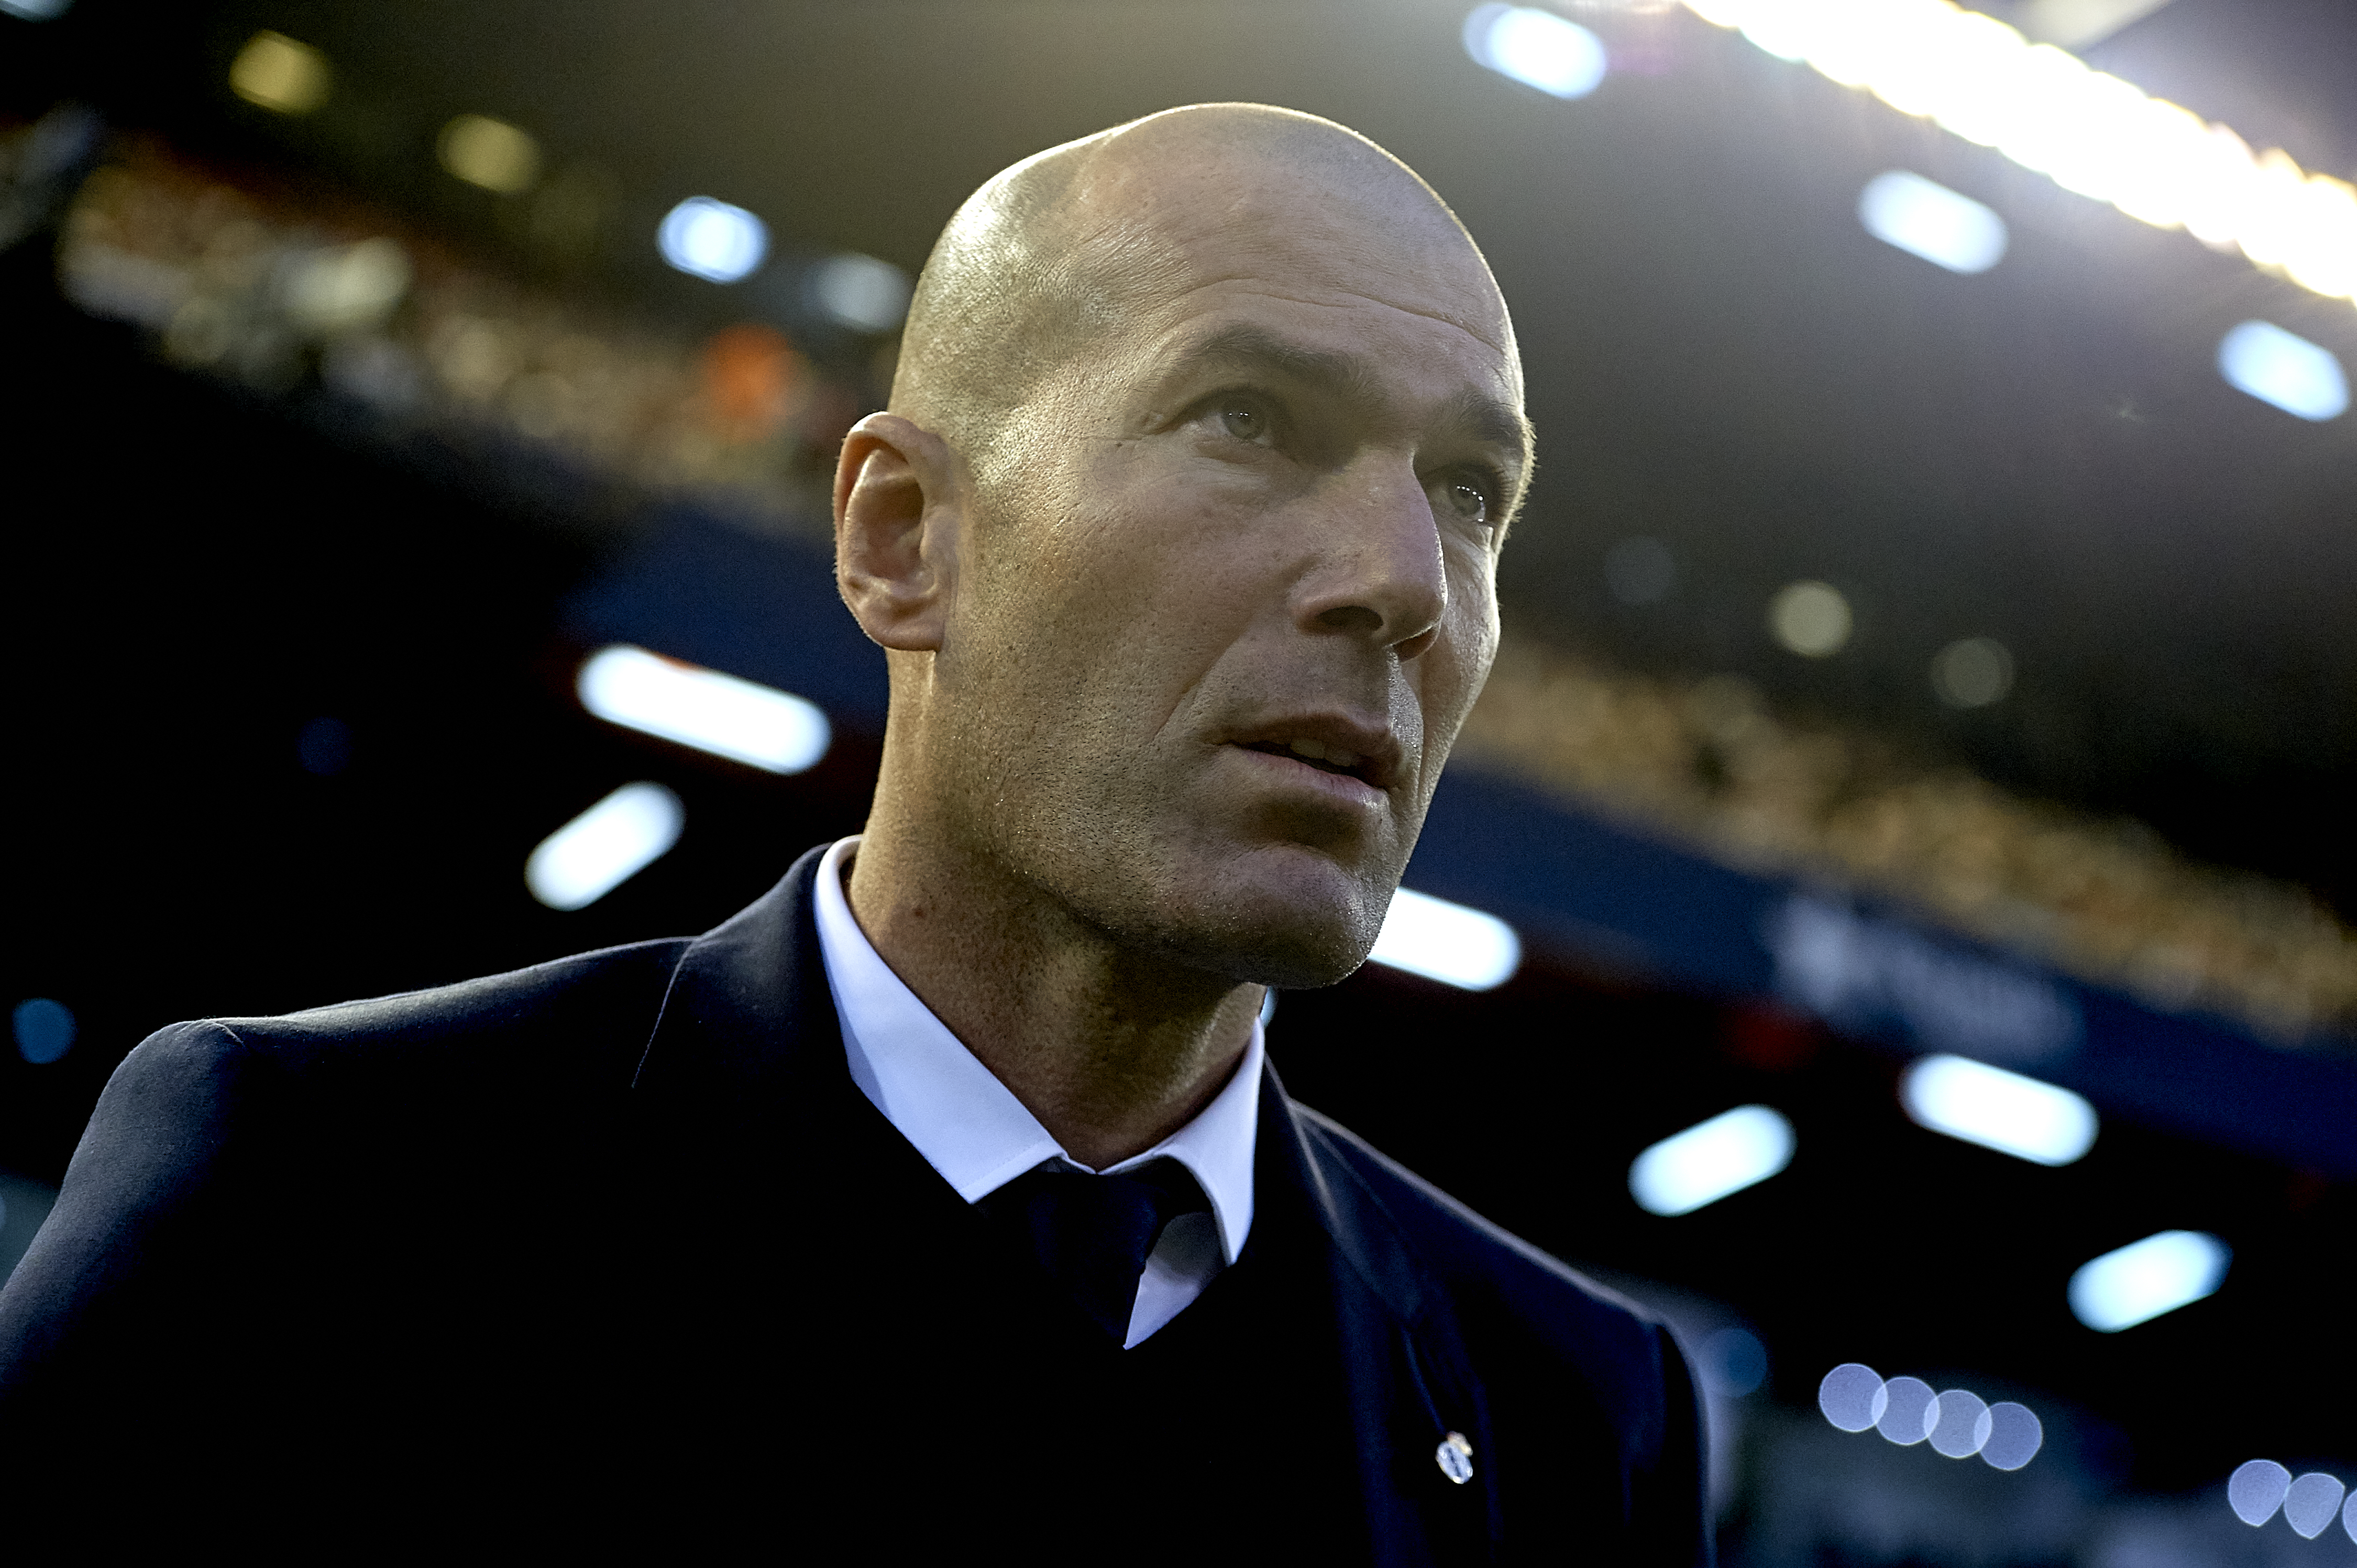 VALENCIA, SPAIN - FEBRUARY 22:  Real Madrid manager Zinedine Zidane looks on prior to the La Liga match between Valencia CF and Real Madrid at Mestalla Stadium on February 22, 2017 in Valencia, Spain.  (Photo by Manuel Queimadelos Alonso/Getty Images)